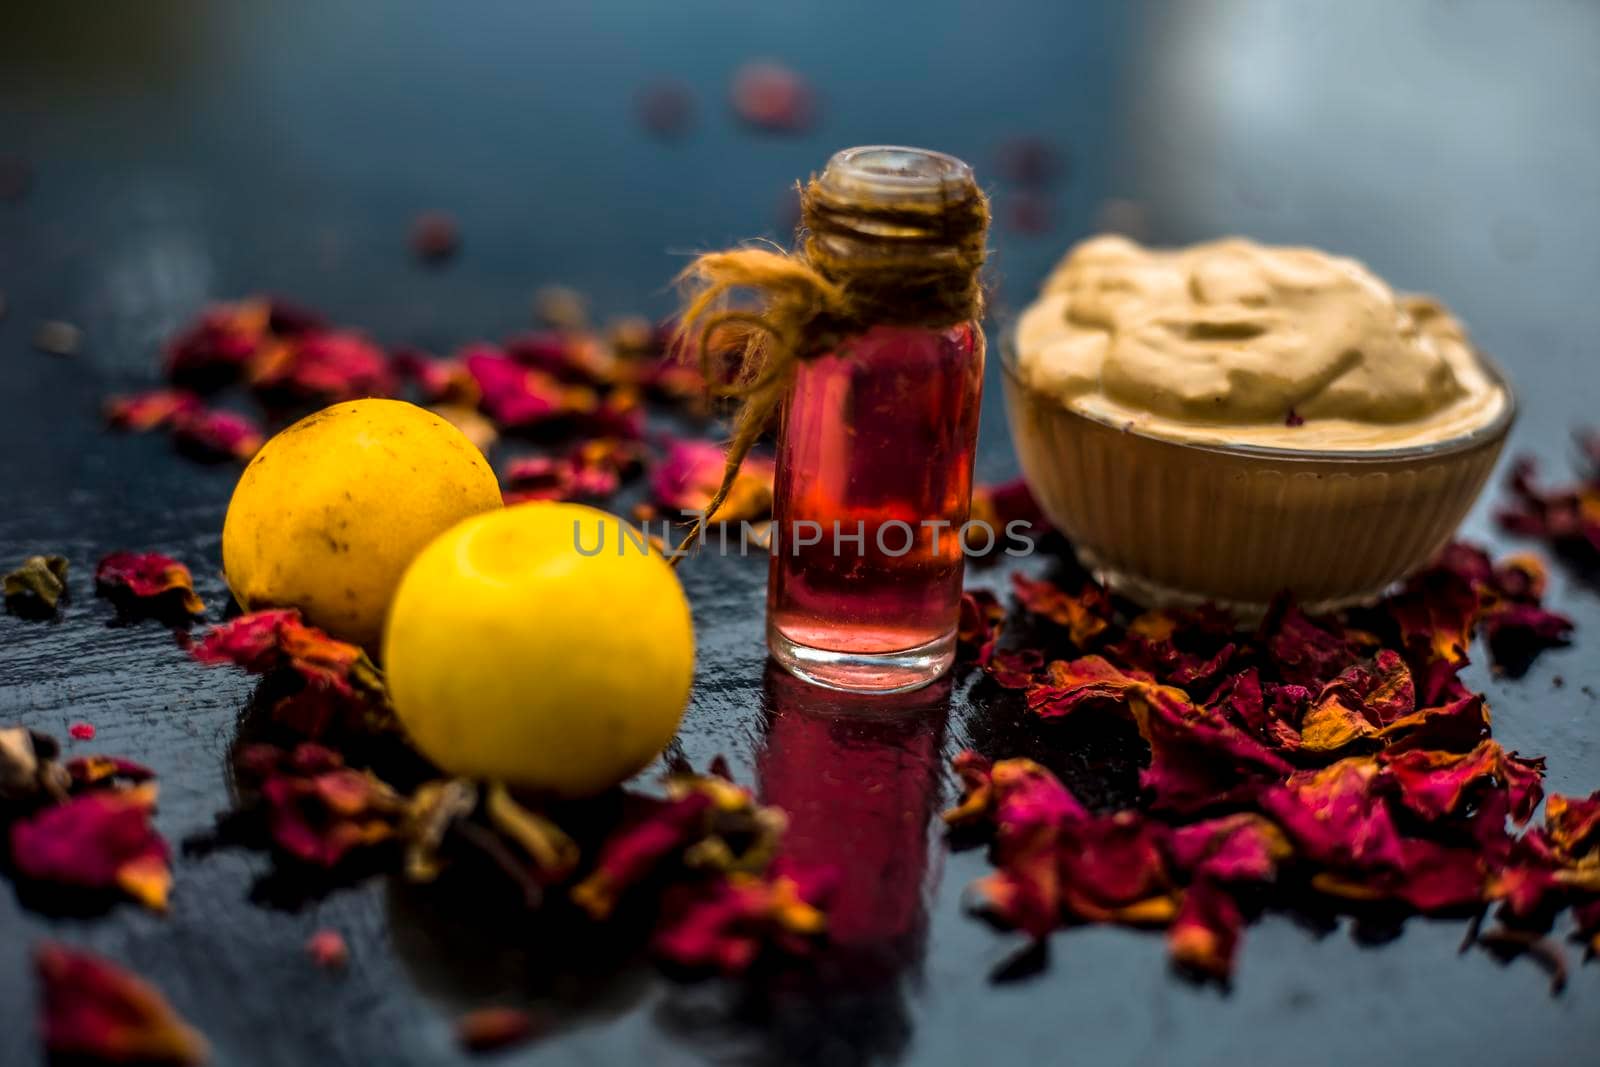 Best cheap DIY face mask for acne scars of multani mitti or fuller's earth or mulpani mitti on the wooden surface consisting of lemon juice, fuller's earth, and some rose water also. by mirzamlk